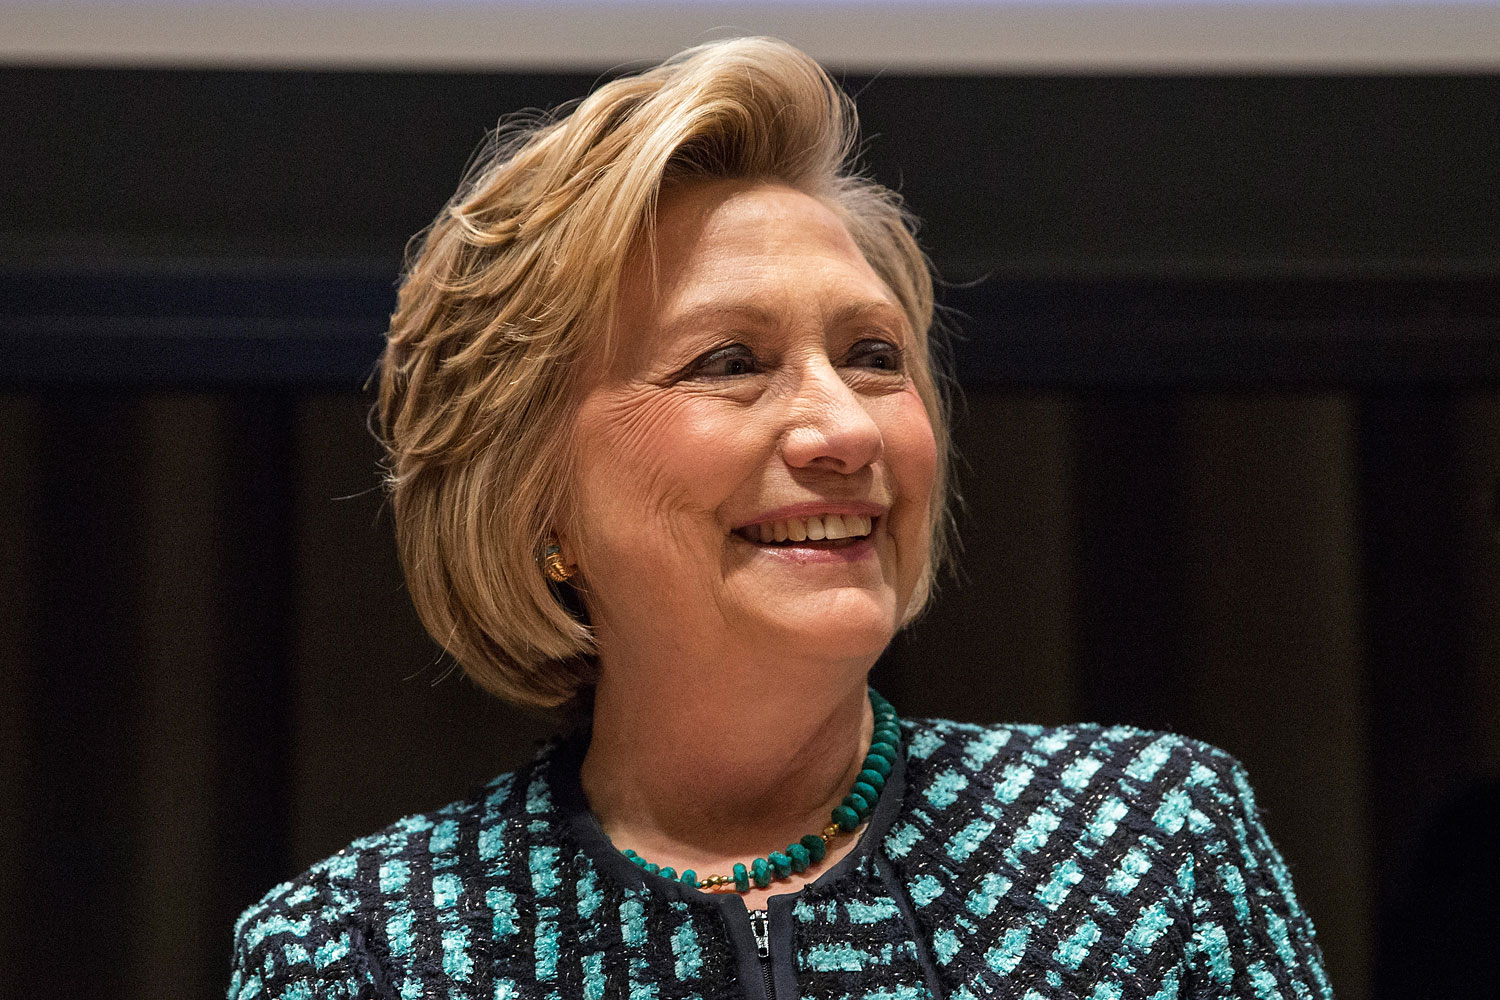 Hillary Clinton at the United Nations on March 7, 2014 in New York City. (Andrew Burton—Getty Images)